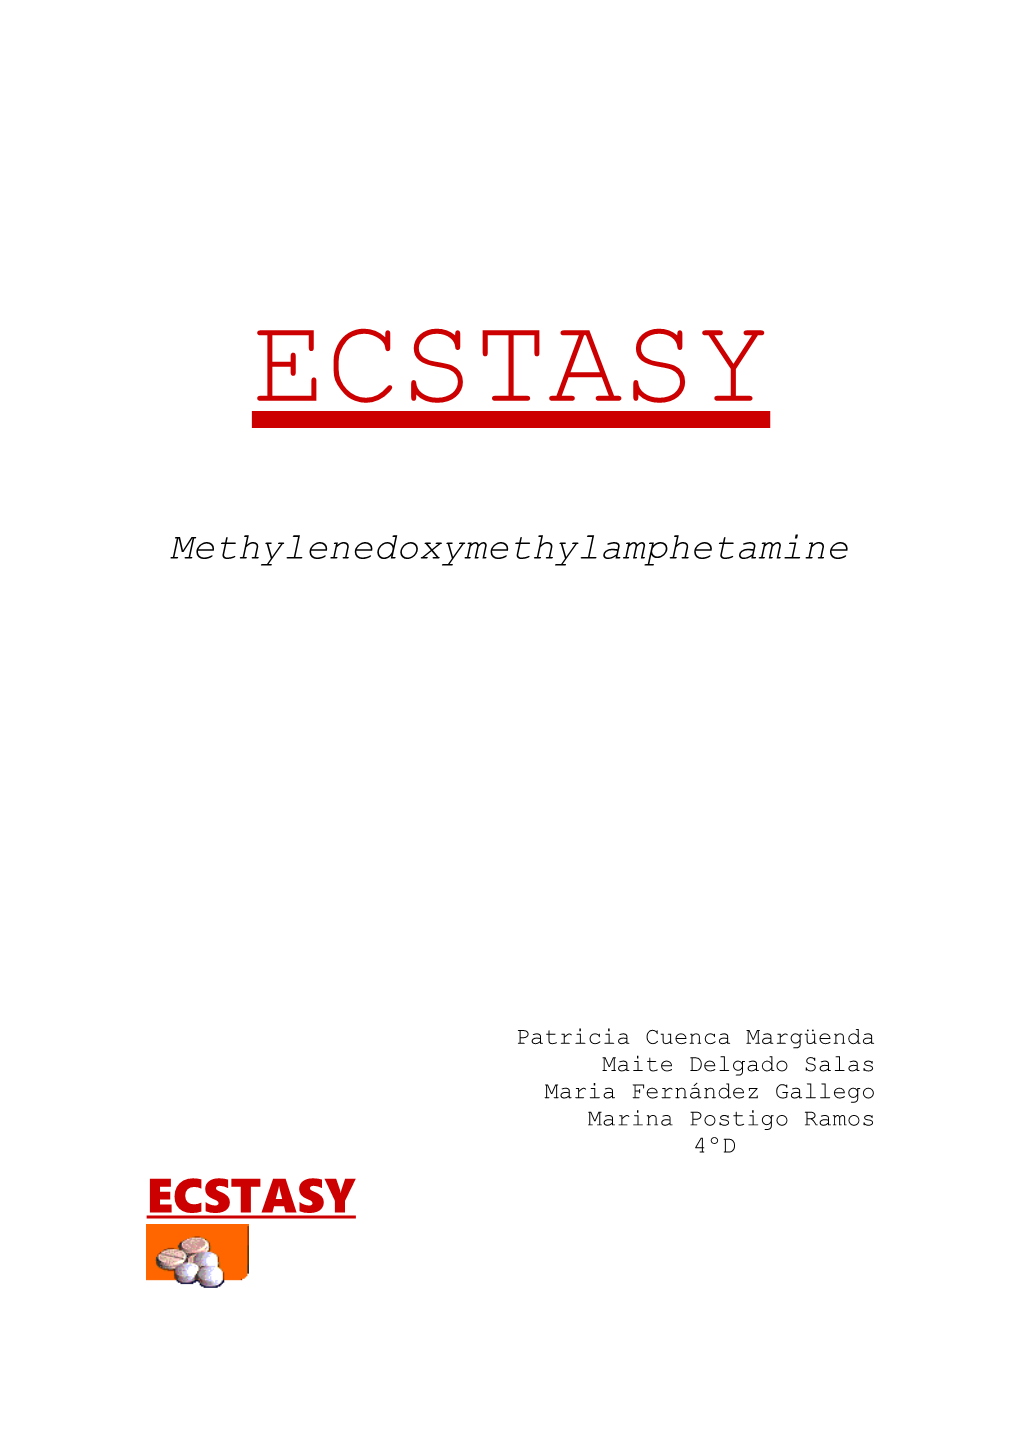 * What Is Ecstasy?